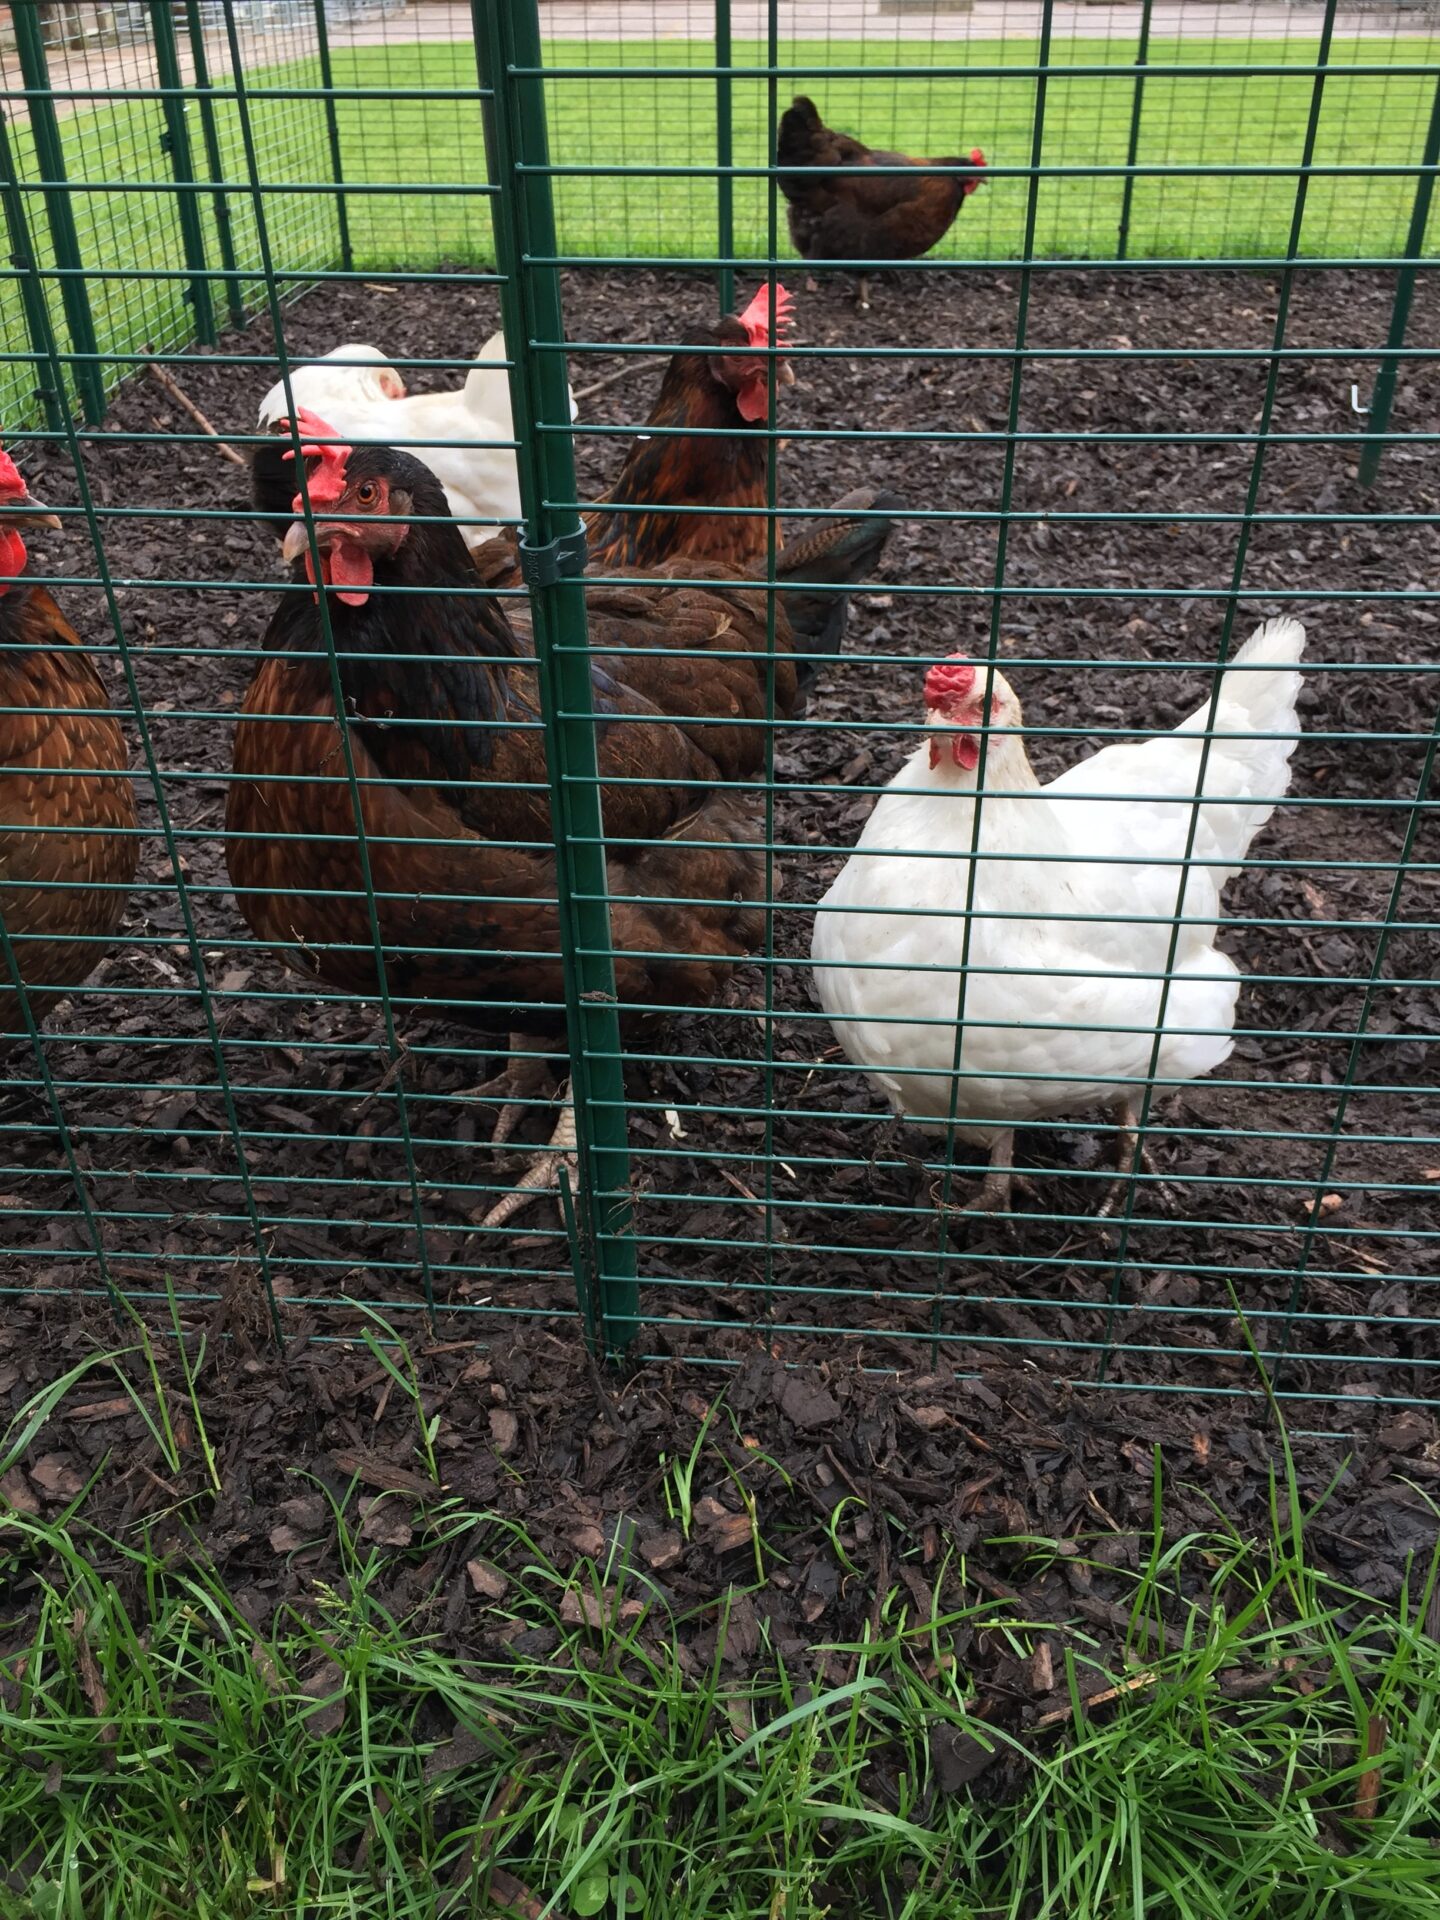 Omlet Chicken Fencing, Poultry Netting for Chickens